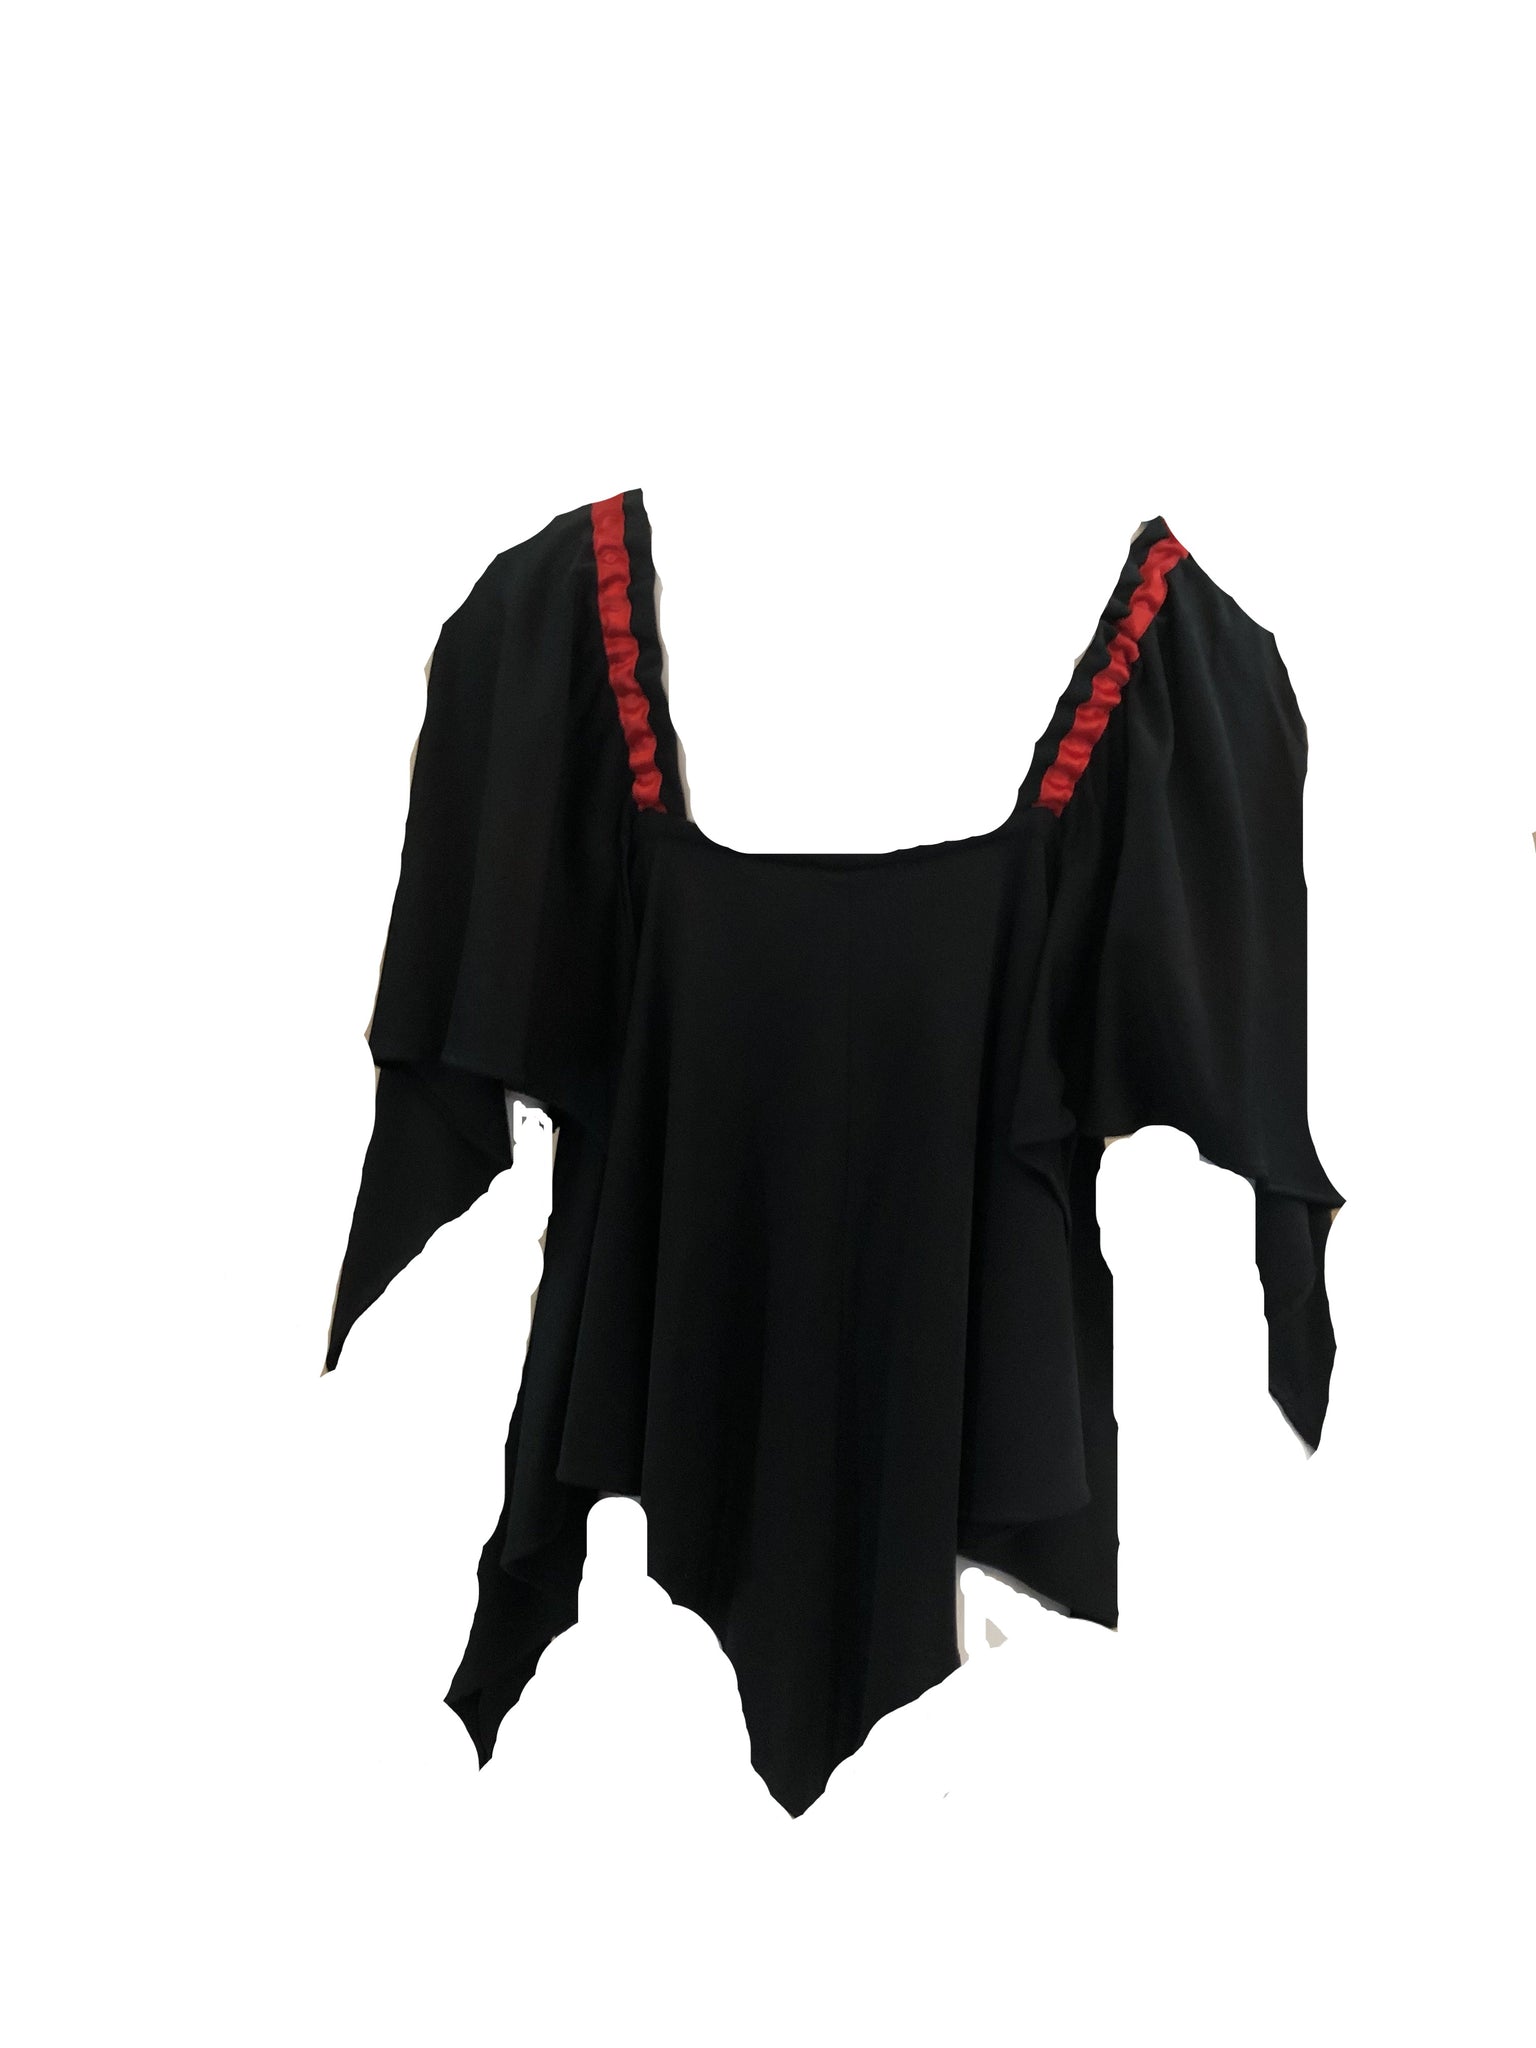  Cacharel 70s Black Hippie Luxe Top  BACK 2 of 4